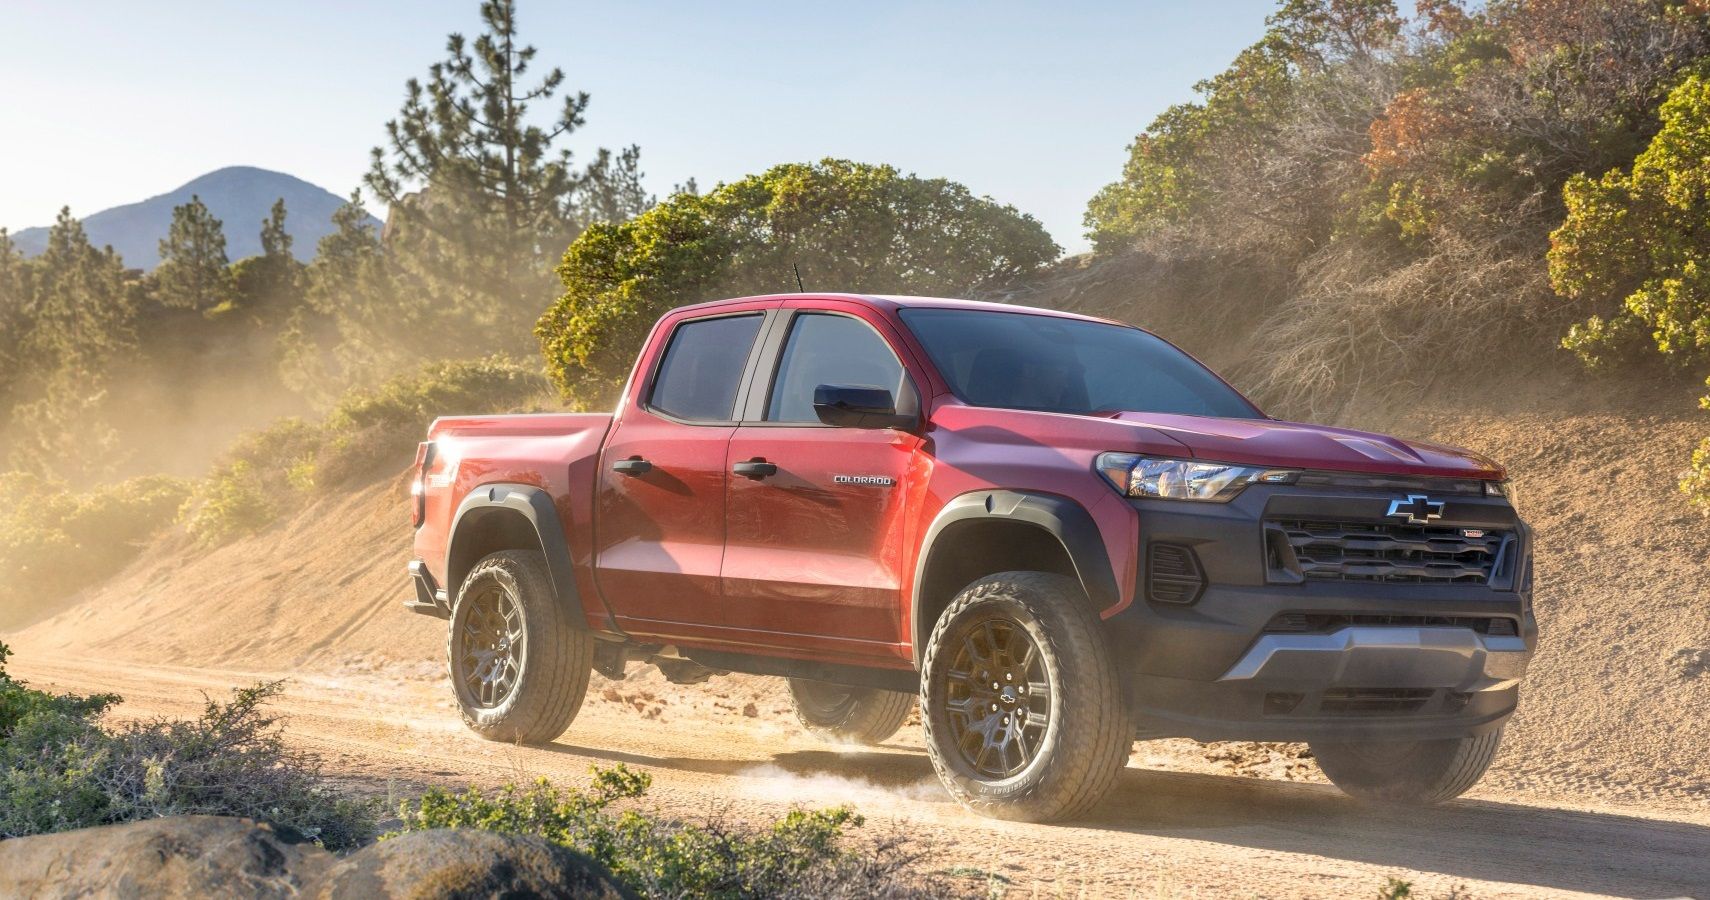 2023 Chevy Colorado Trail Boss Feature Image